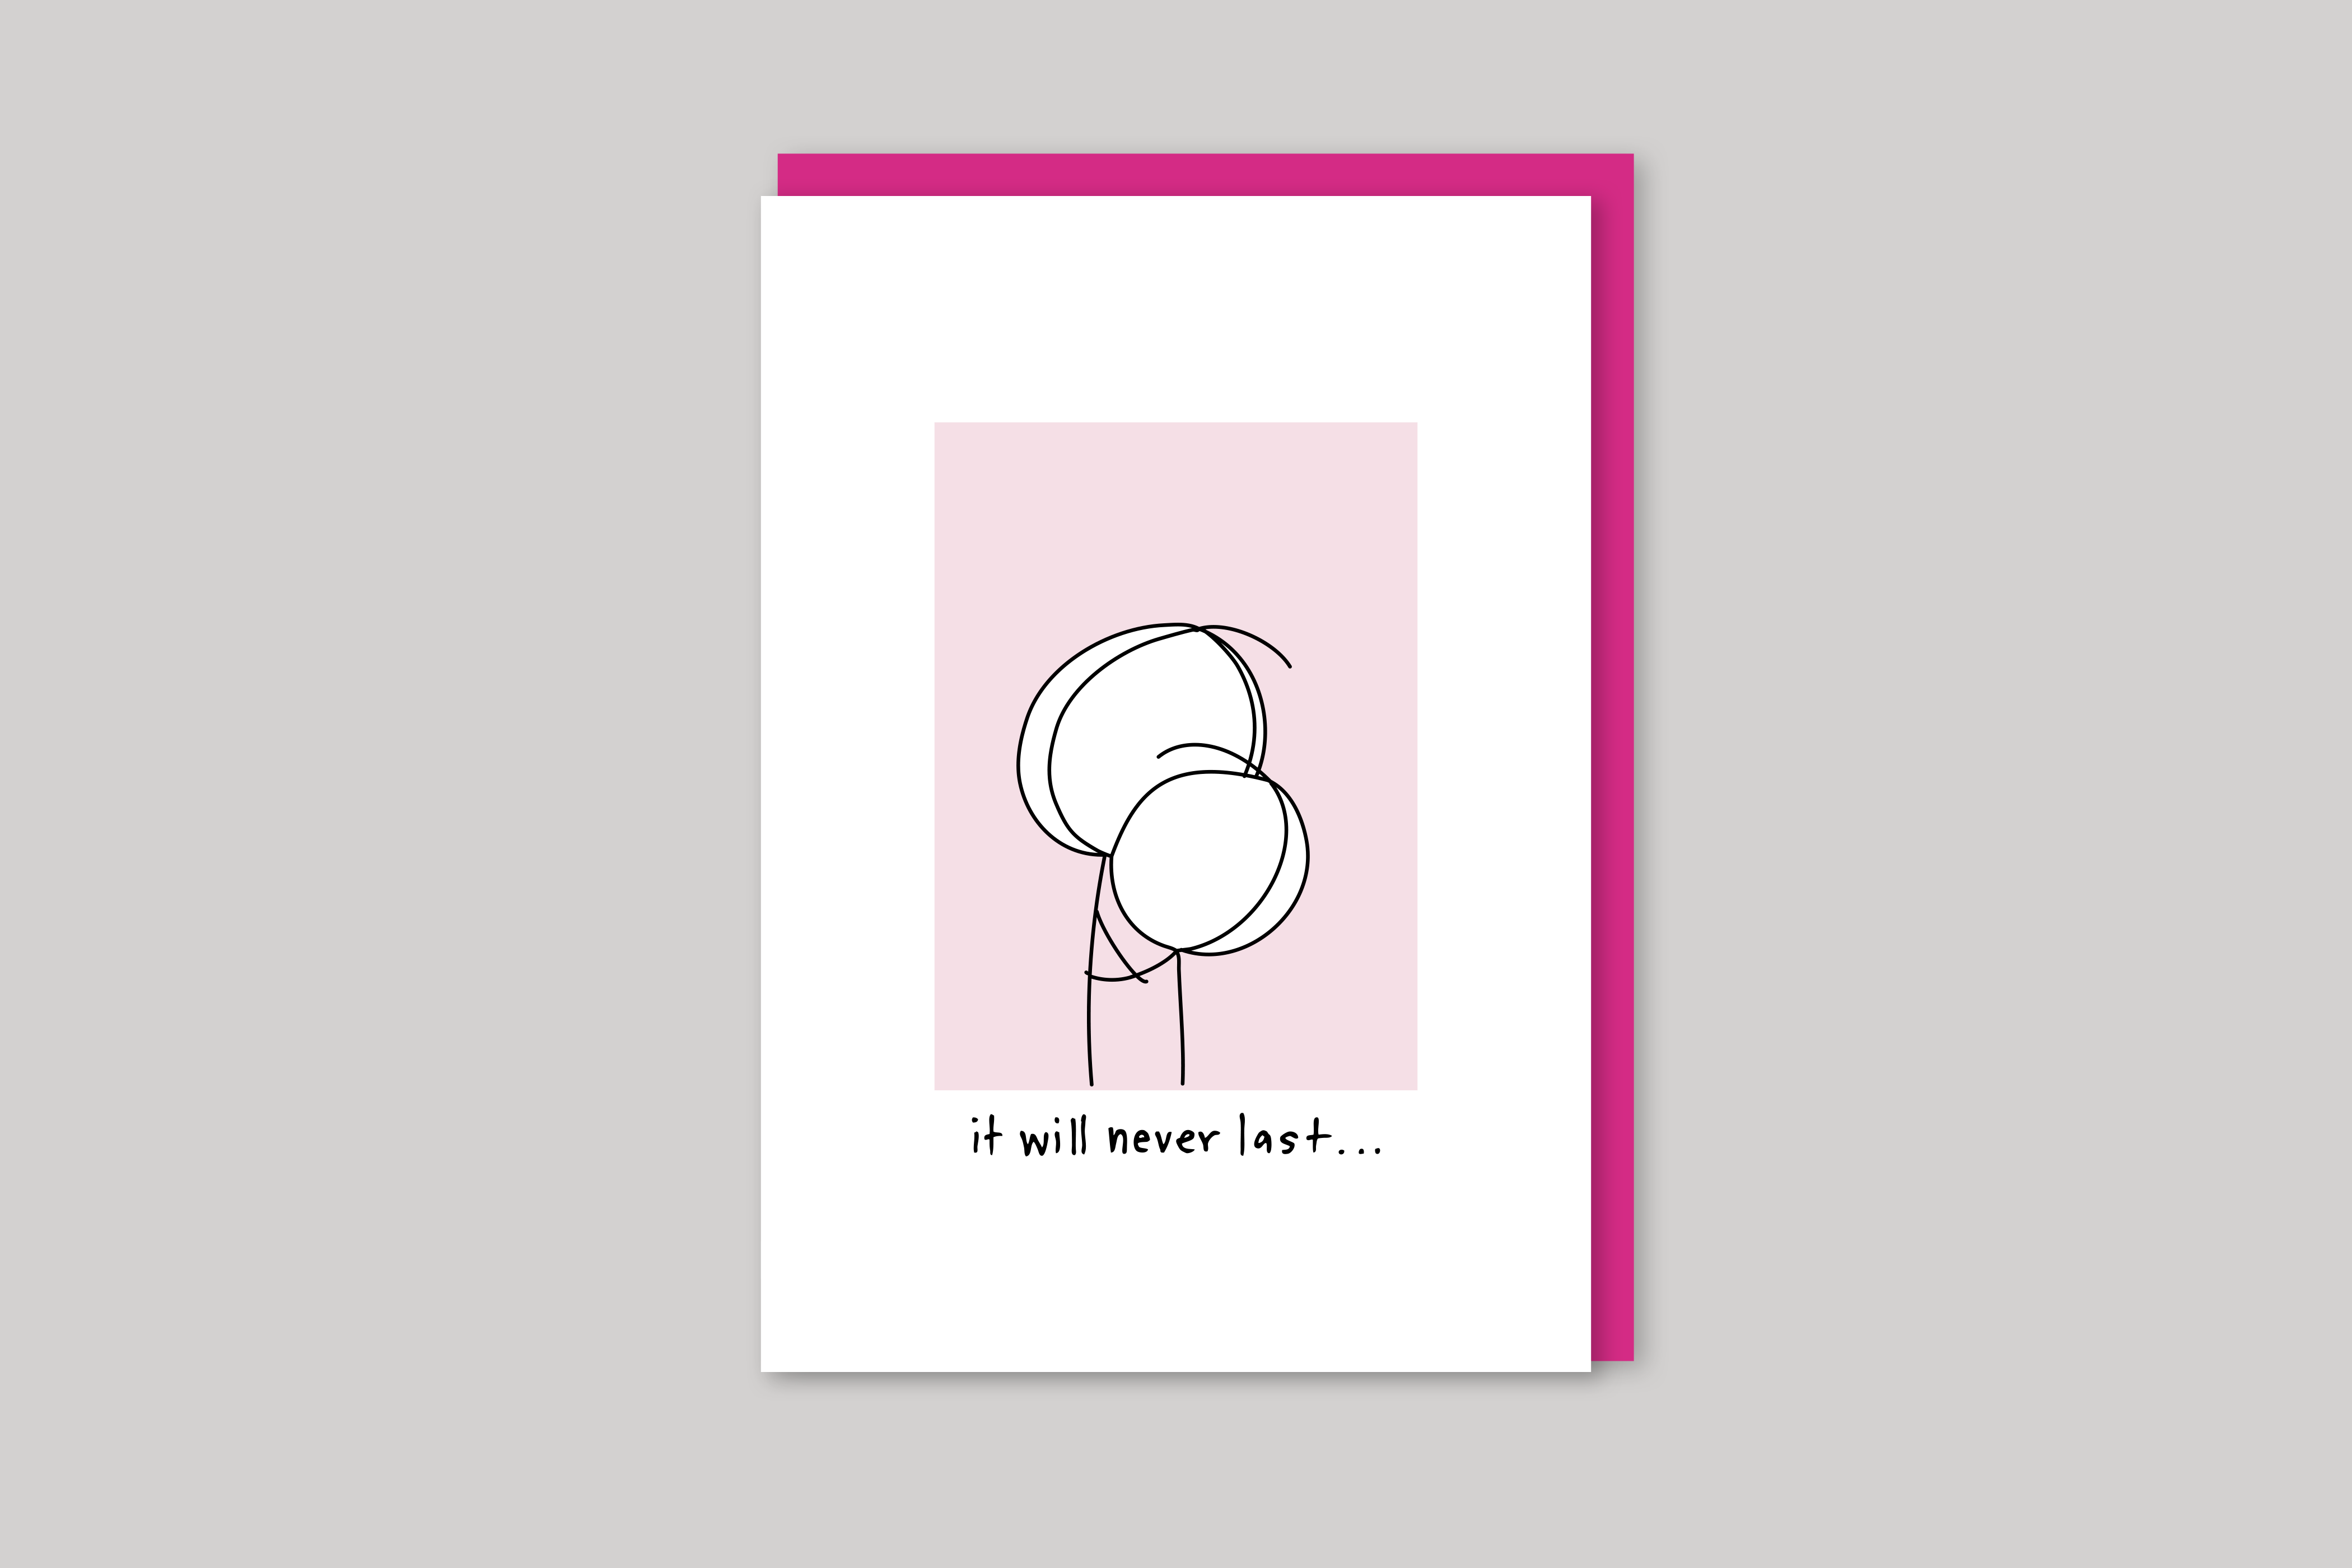 It Will Never Last engagement card humorous illustration from Mean Cards range of greeting cards by Icon, back page.